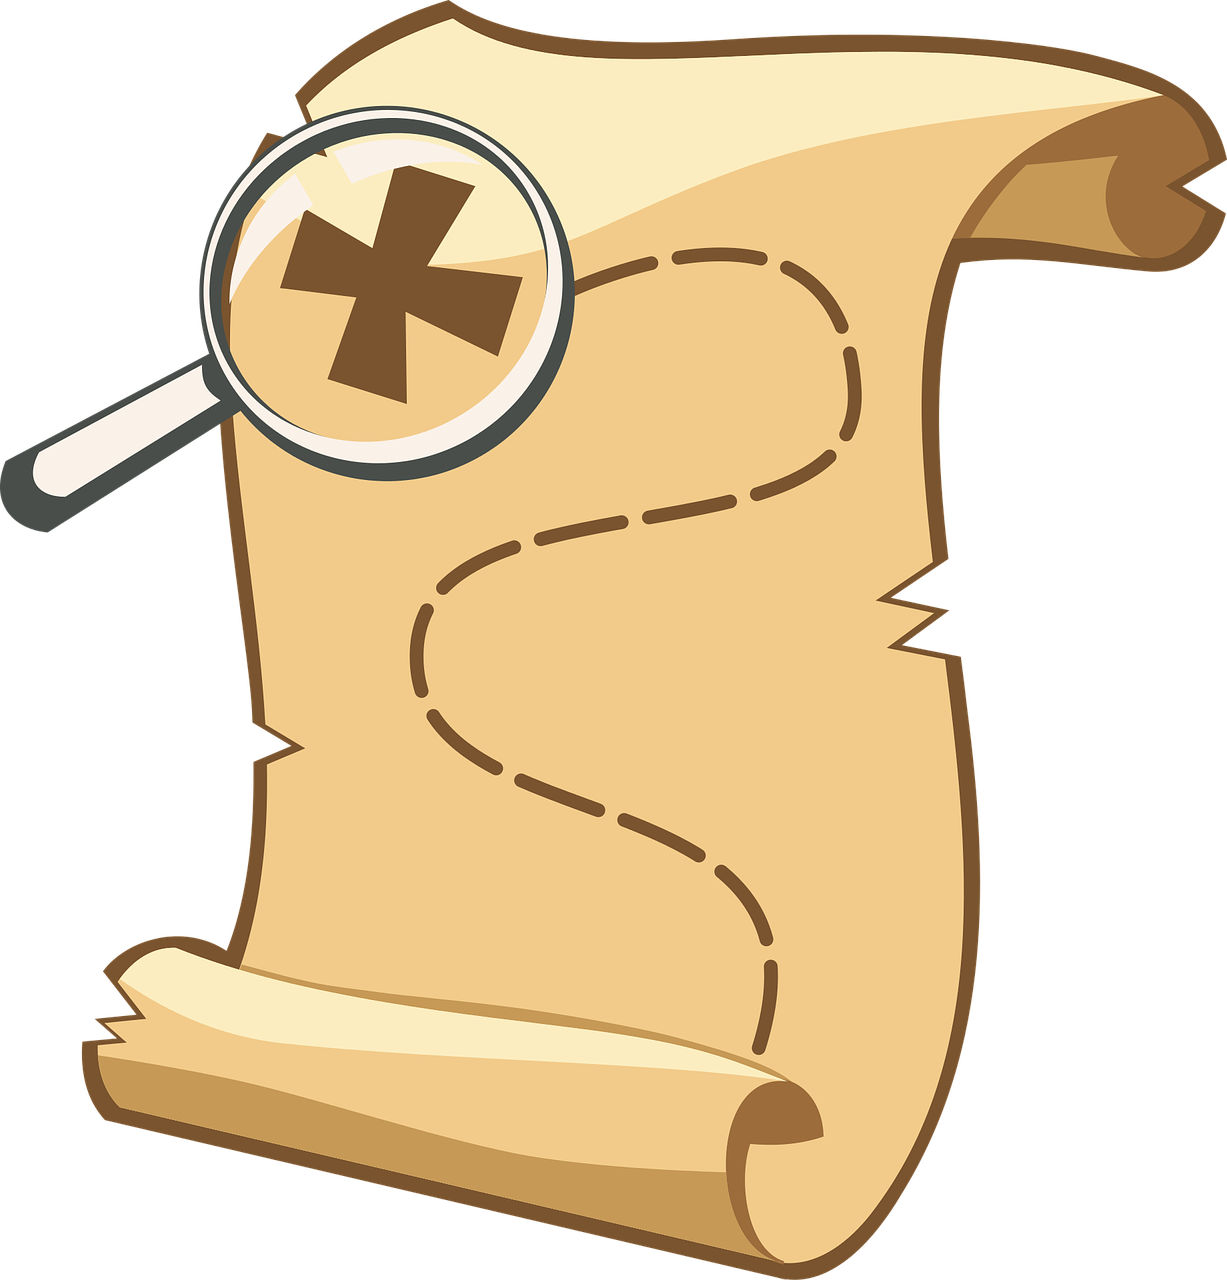 A cartoon picture of a treasure map, with a magnifying glass over the X.